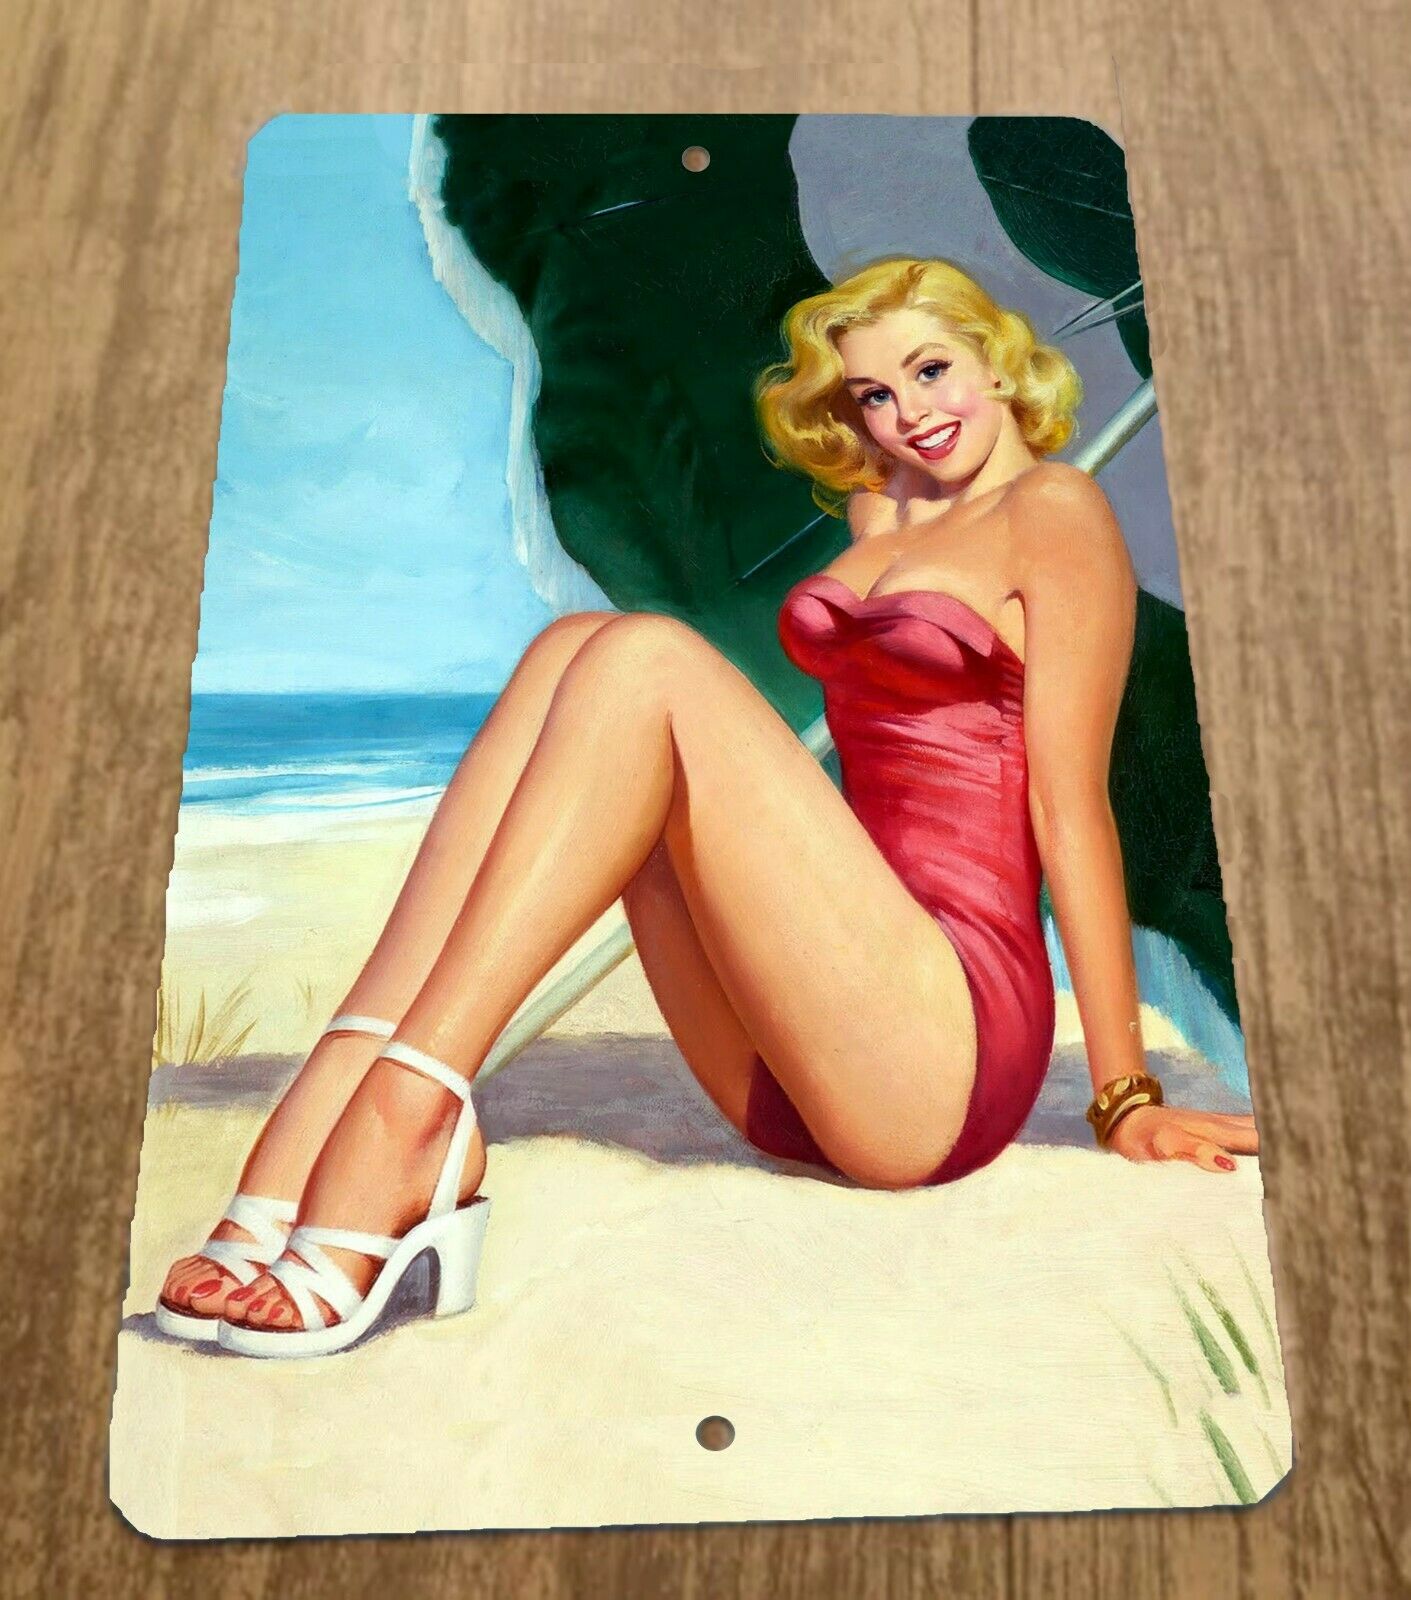 Beach Blonde Pinup Girl Artwork 8x12 Metal Wall Vintage Misc Poster Sign